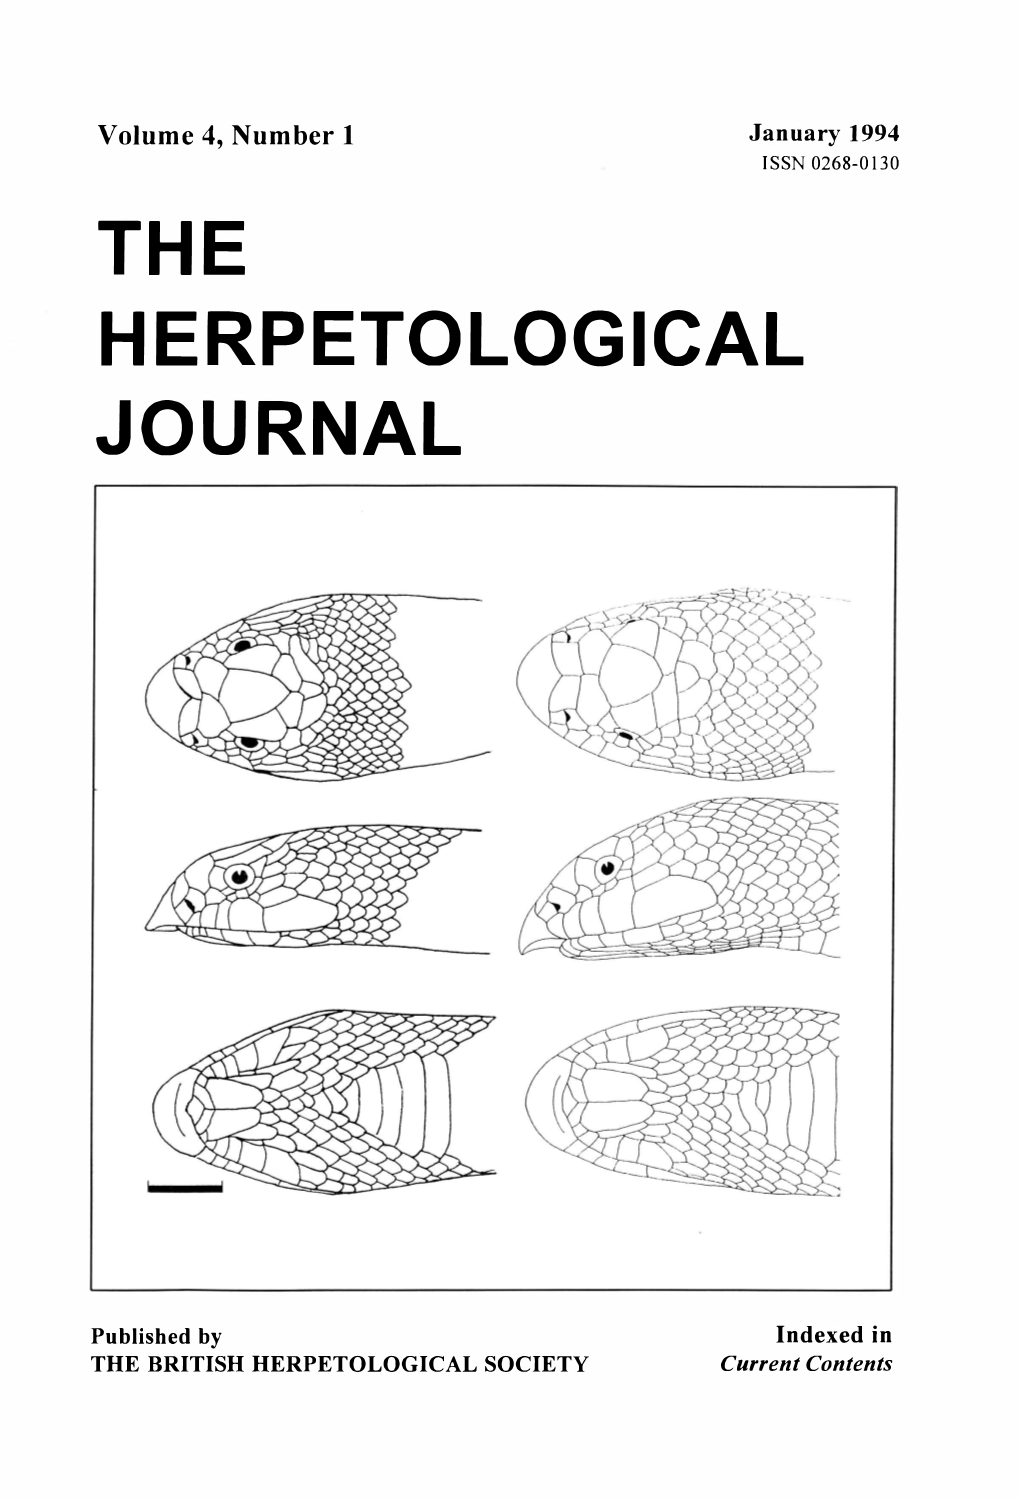 The Herpetological Journal